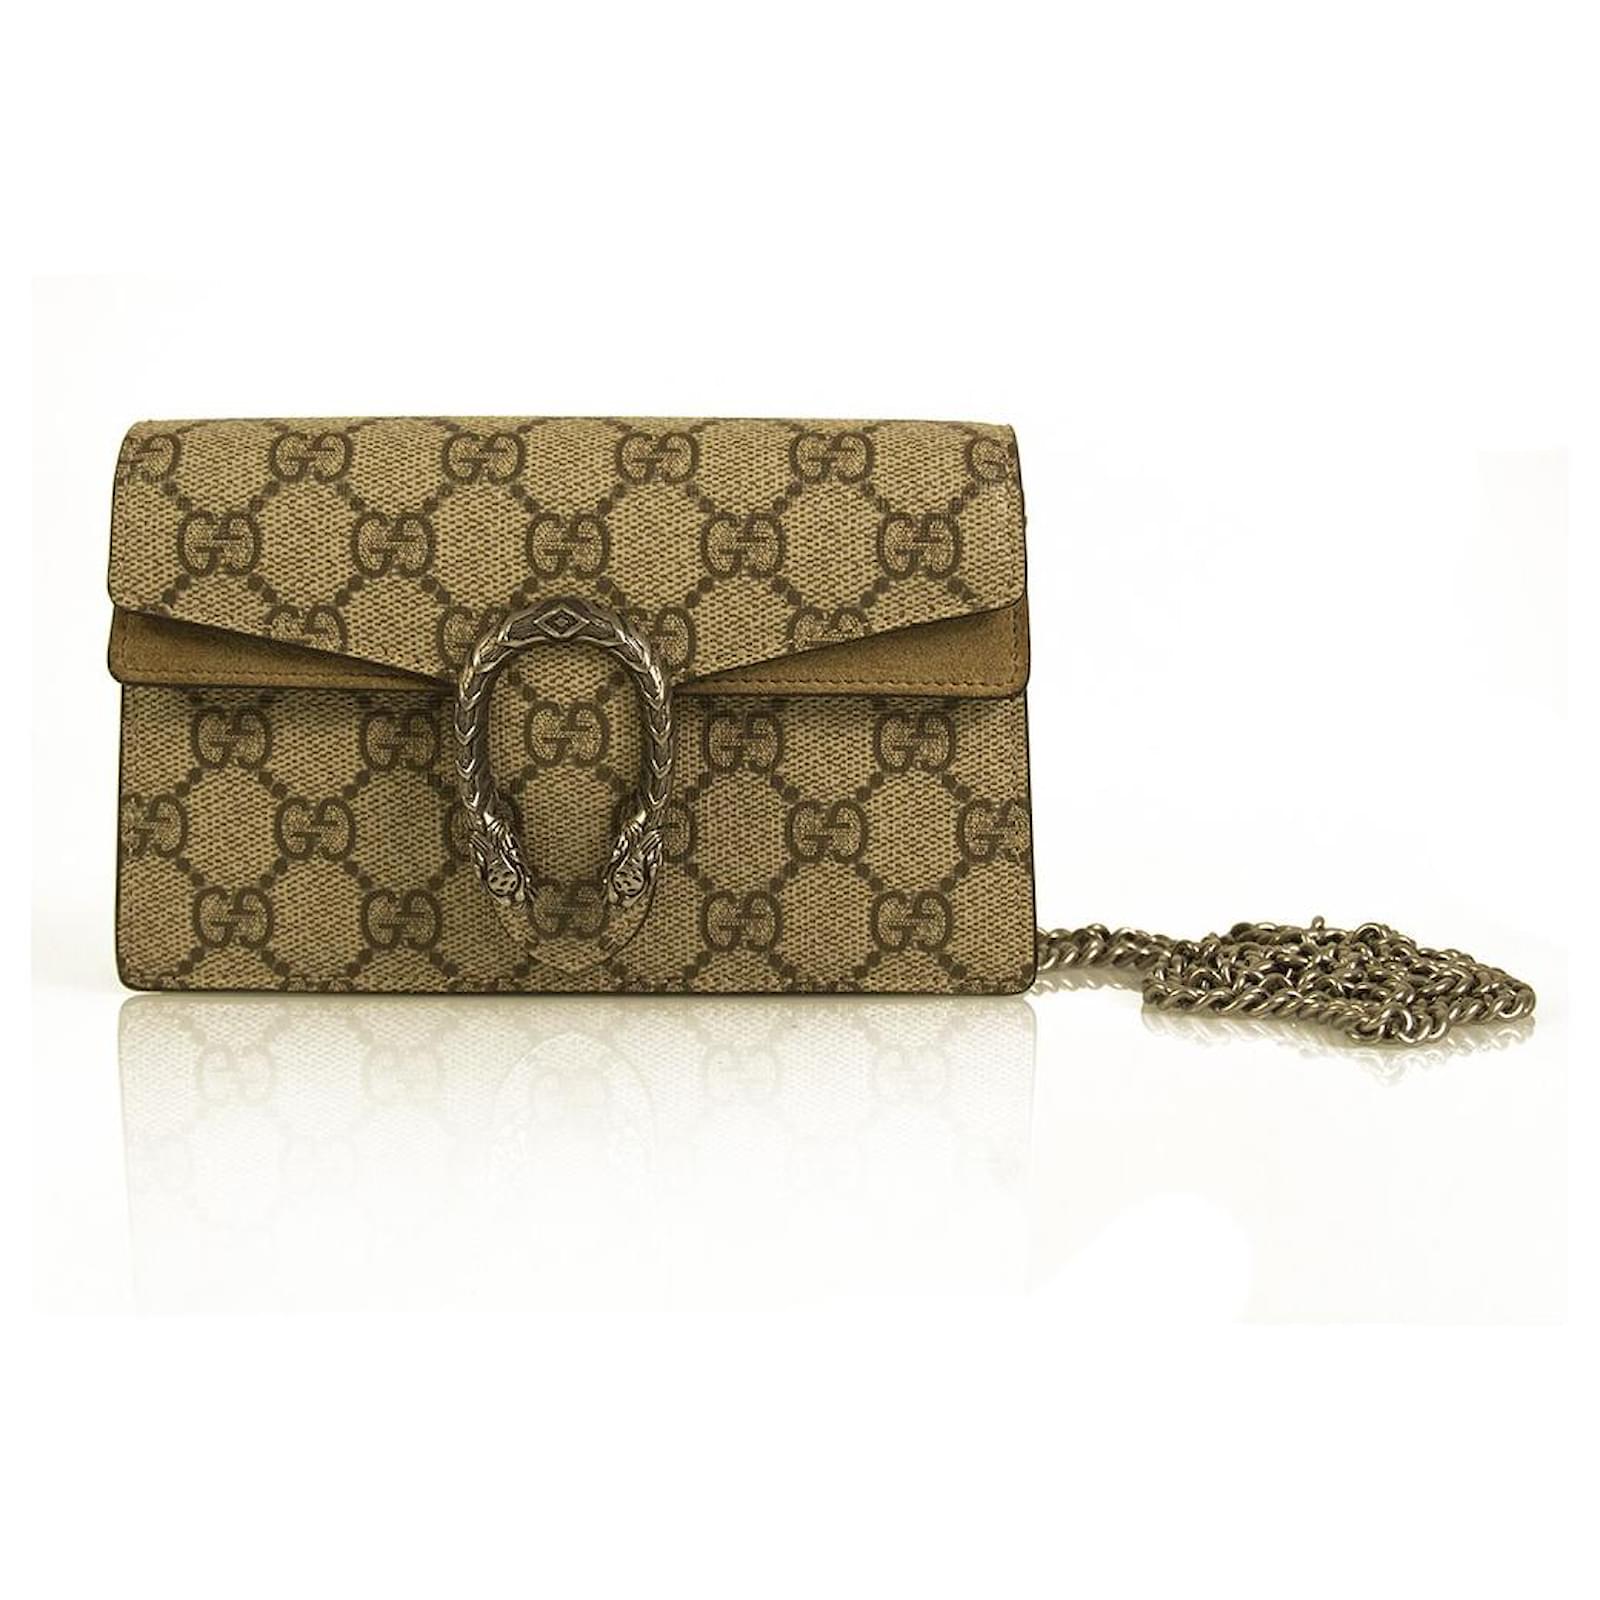 Gucci Brown Suede Small GG Ring Shoulder Bag Gold Hardware (Like New)